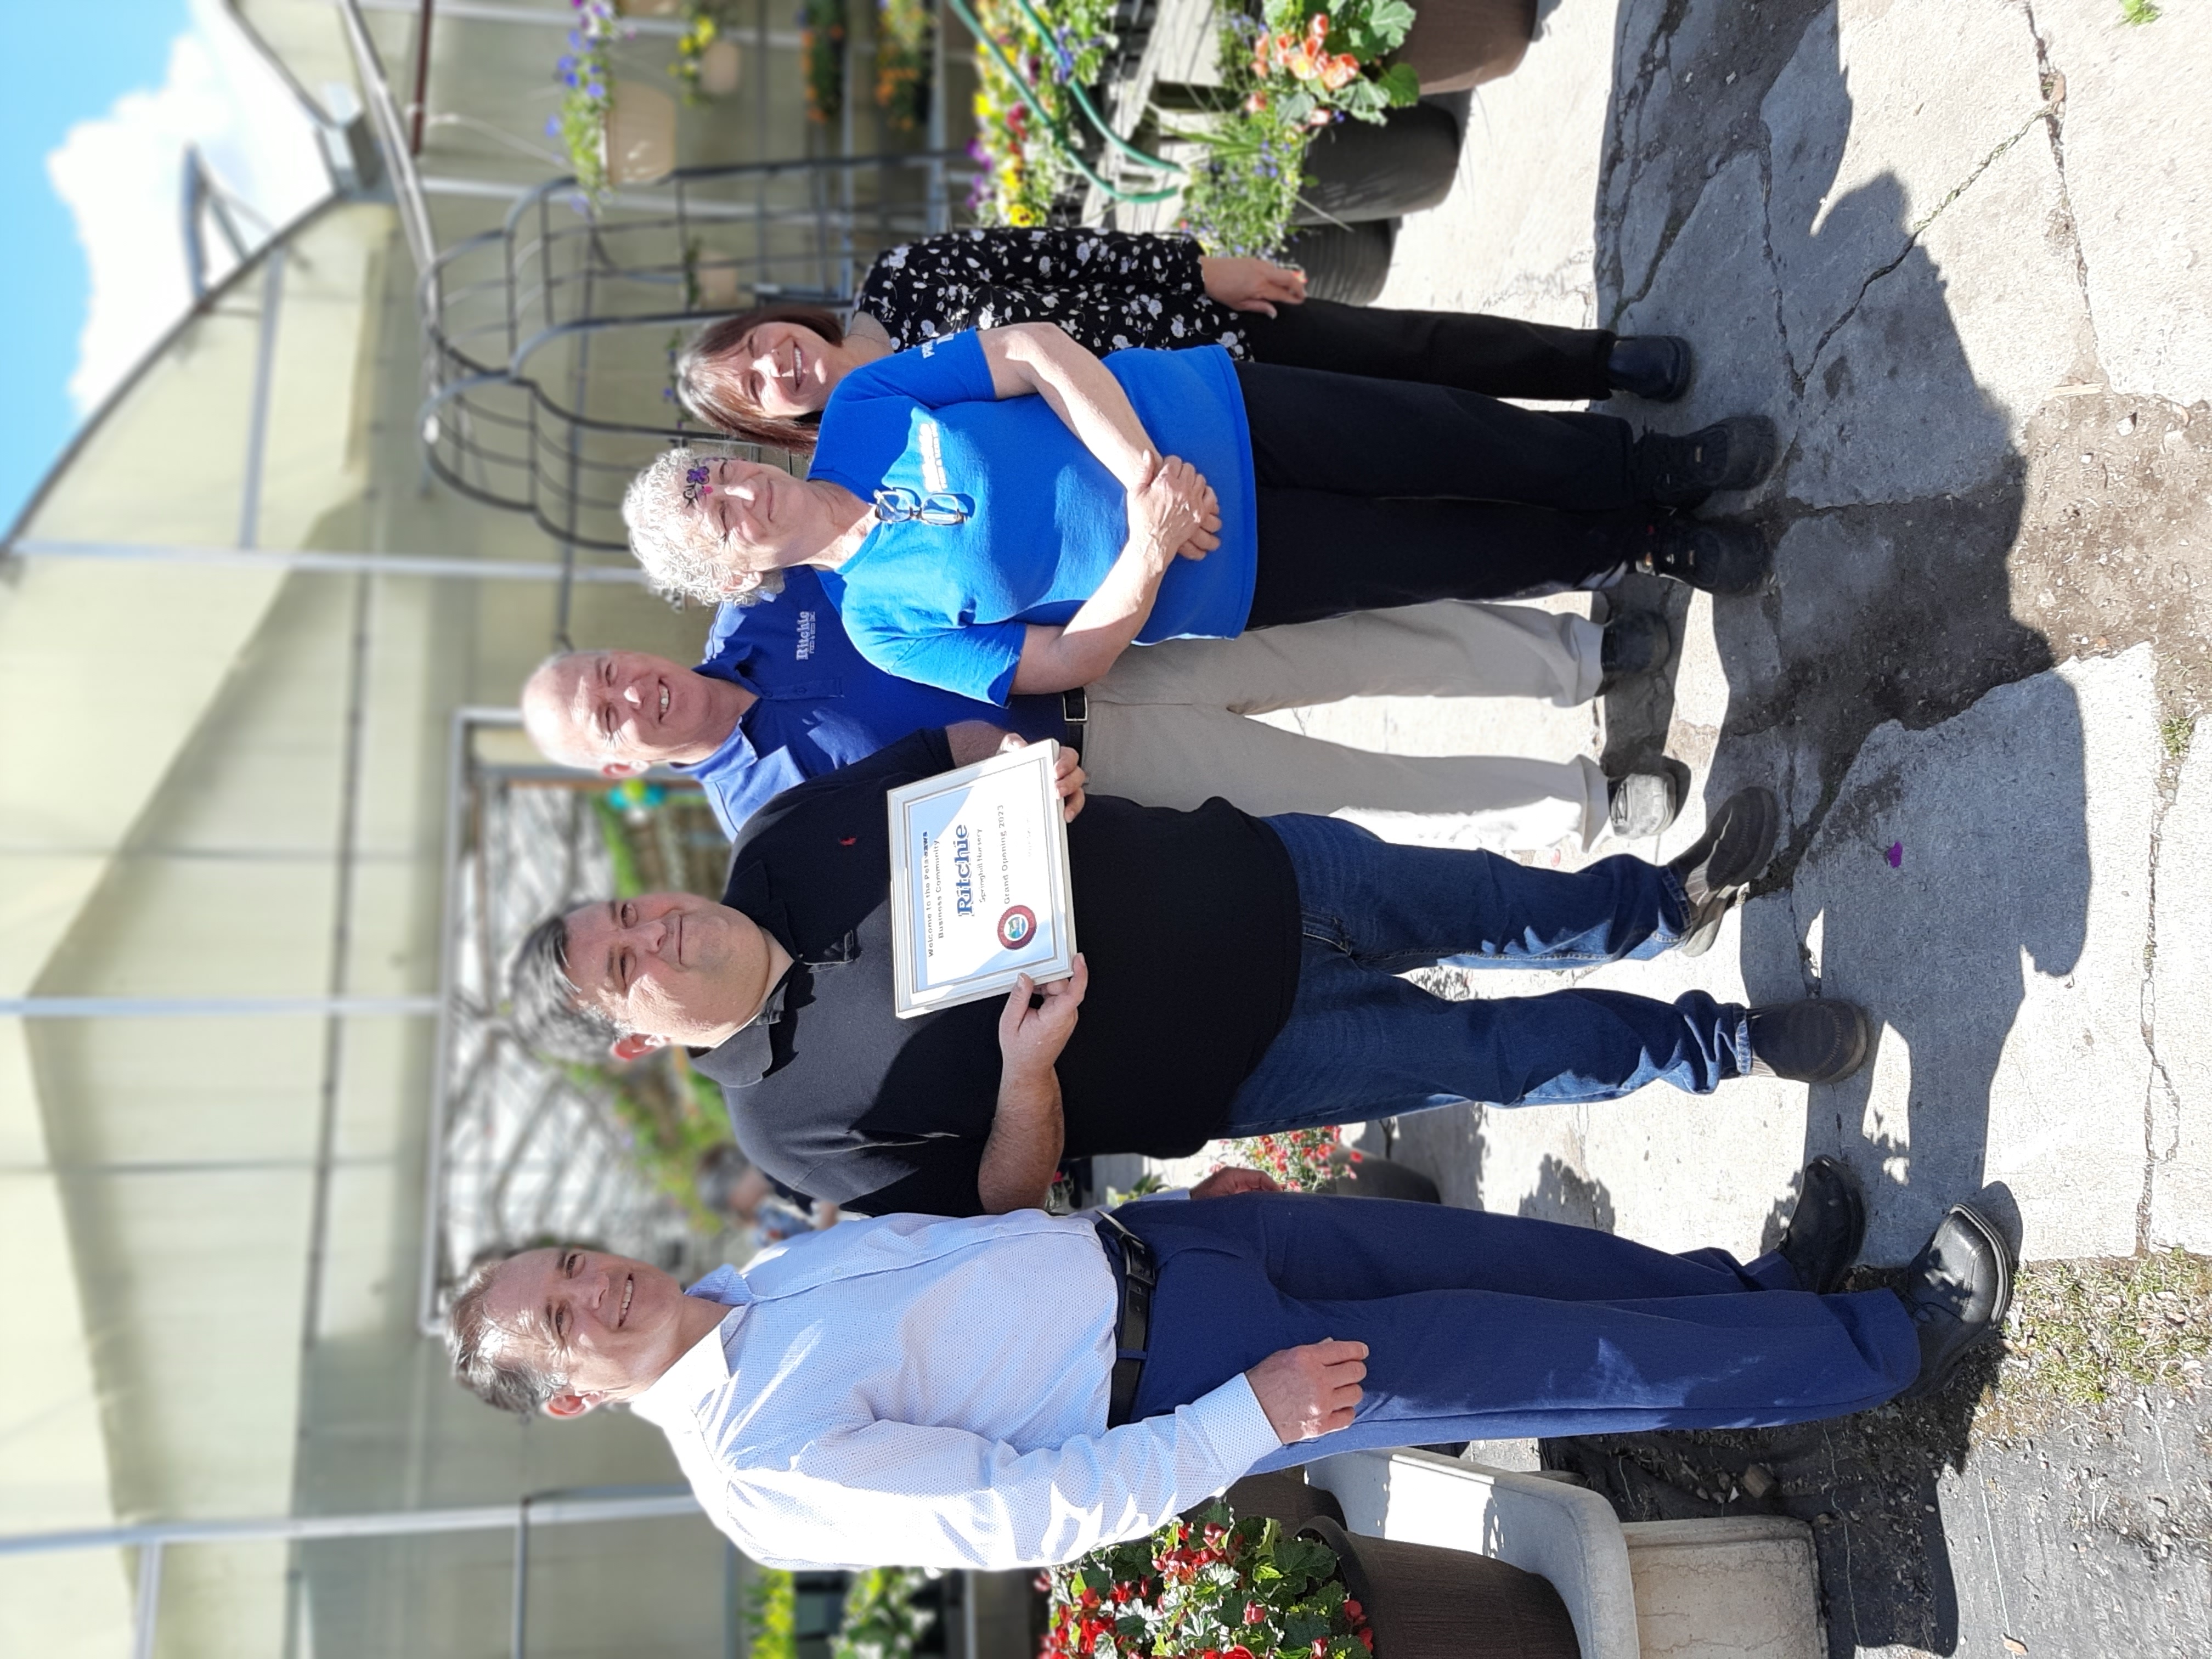 An image of the certificate presentation at the Grand Opening of Richie Feed and Seed